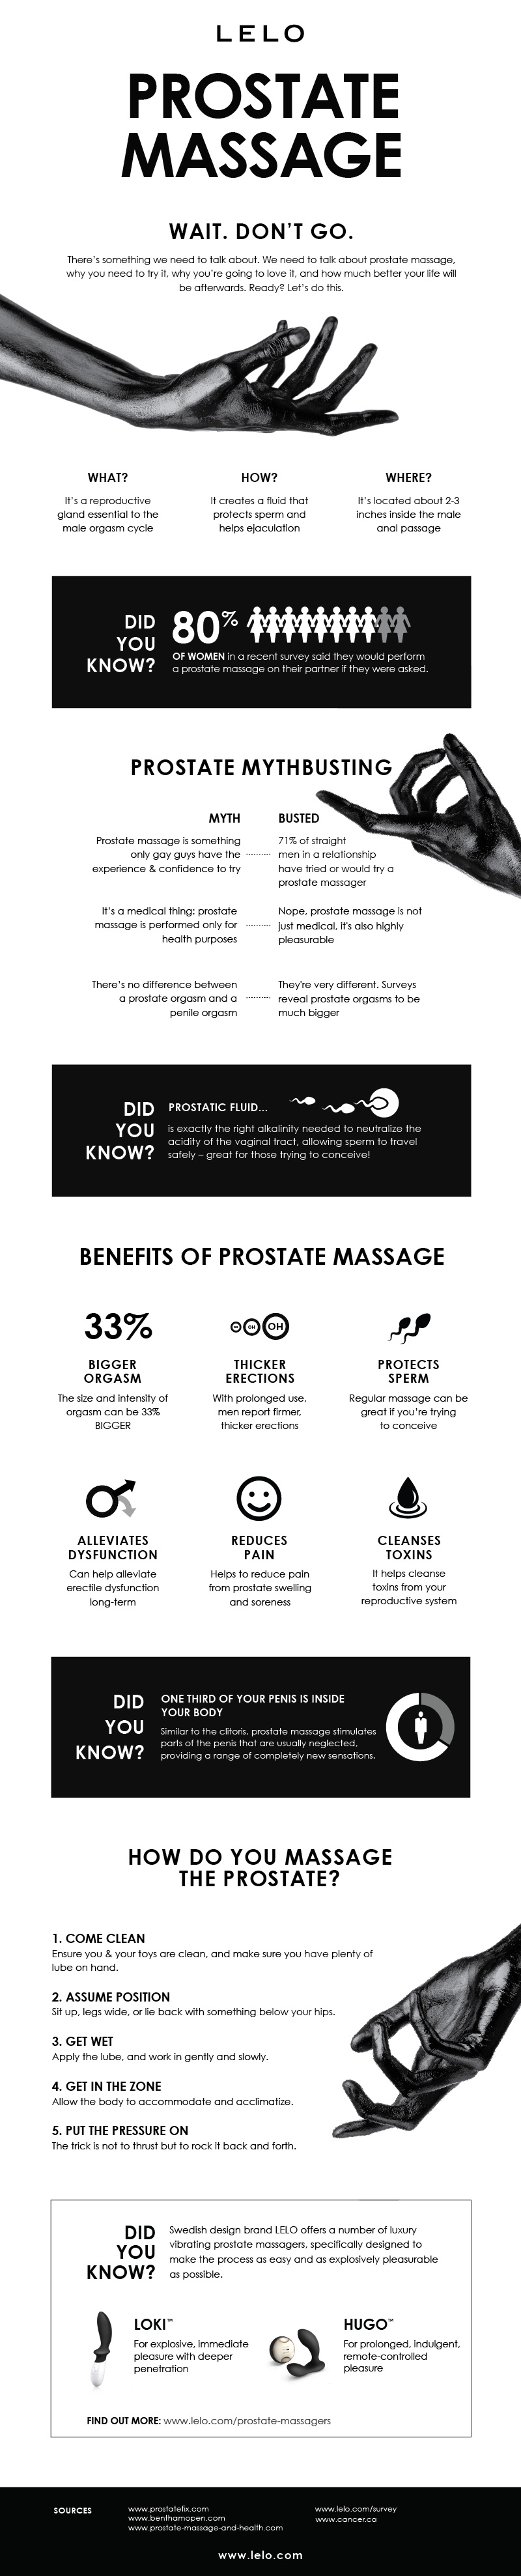 How To Prostate Massage – Telegraph